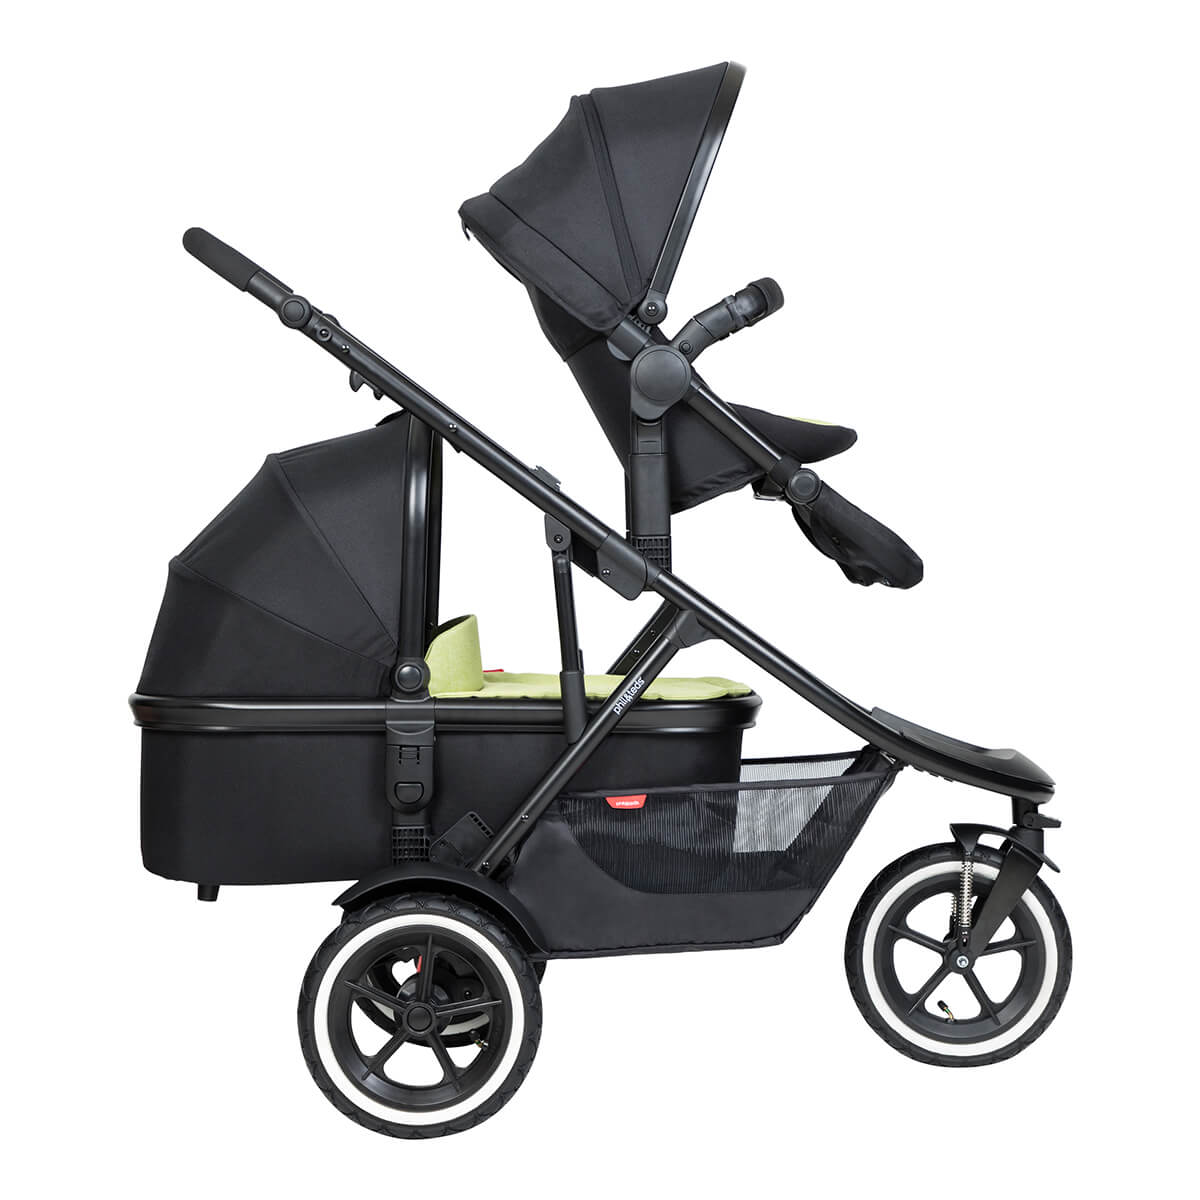 https://cdn.accentuate.io/4417282441250/19437753499826/philteds-sport-buggy-with-double-kit-extended-clip-and-snug-carrycot-side-view-v1626482722993.jpg?1200x1200